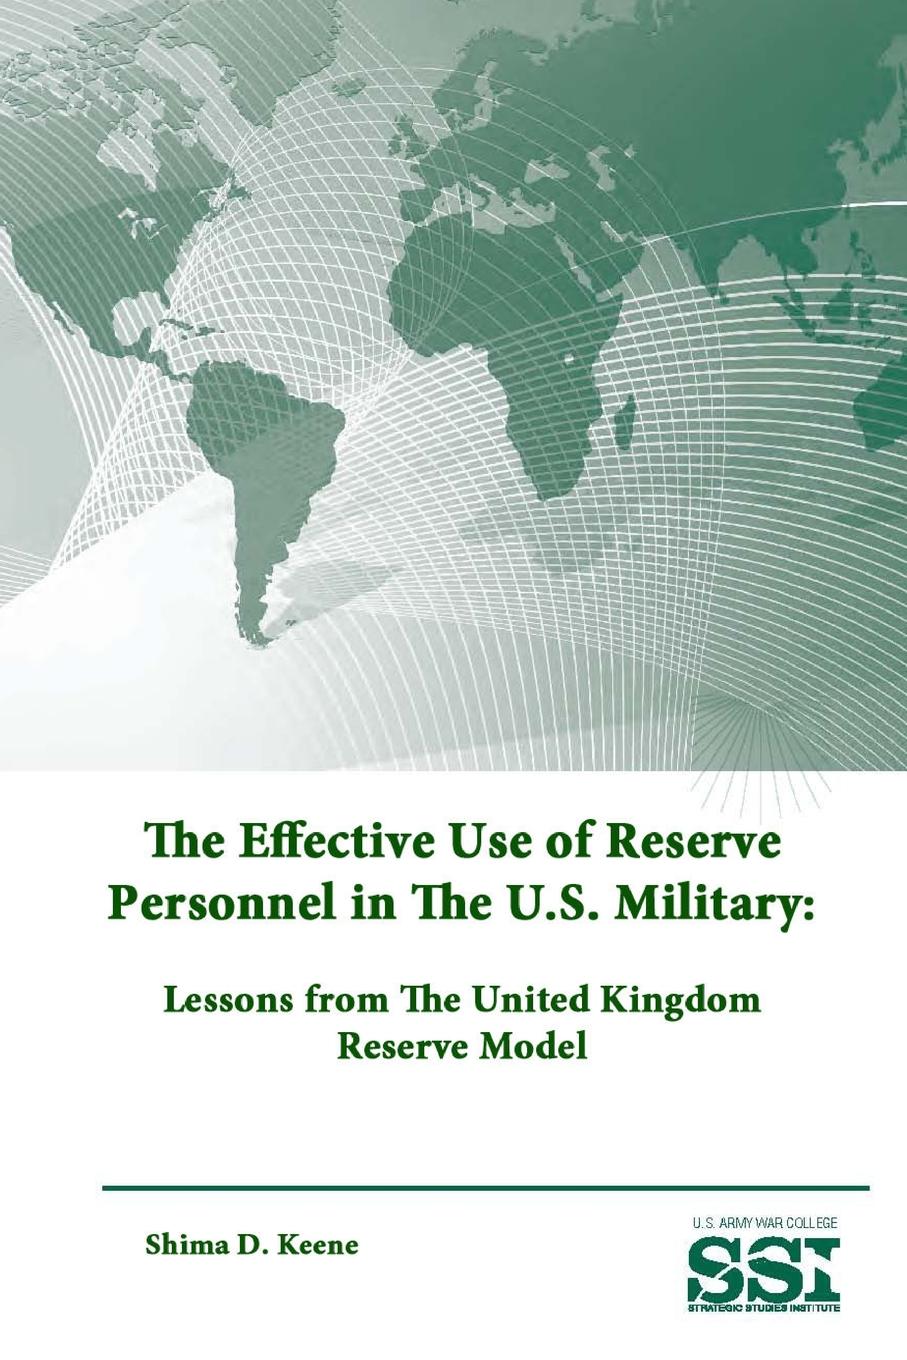 The Effective Use of Reserve Personnel In The U.S. Military. Lessons from The United Kingdom Reserve Model